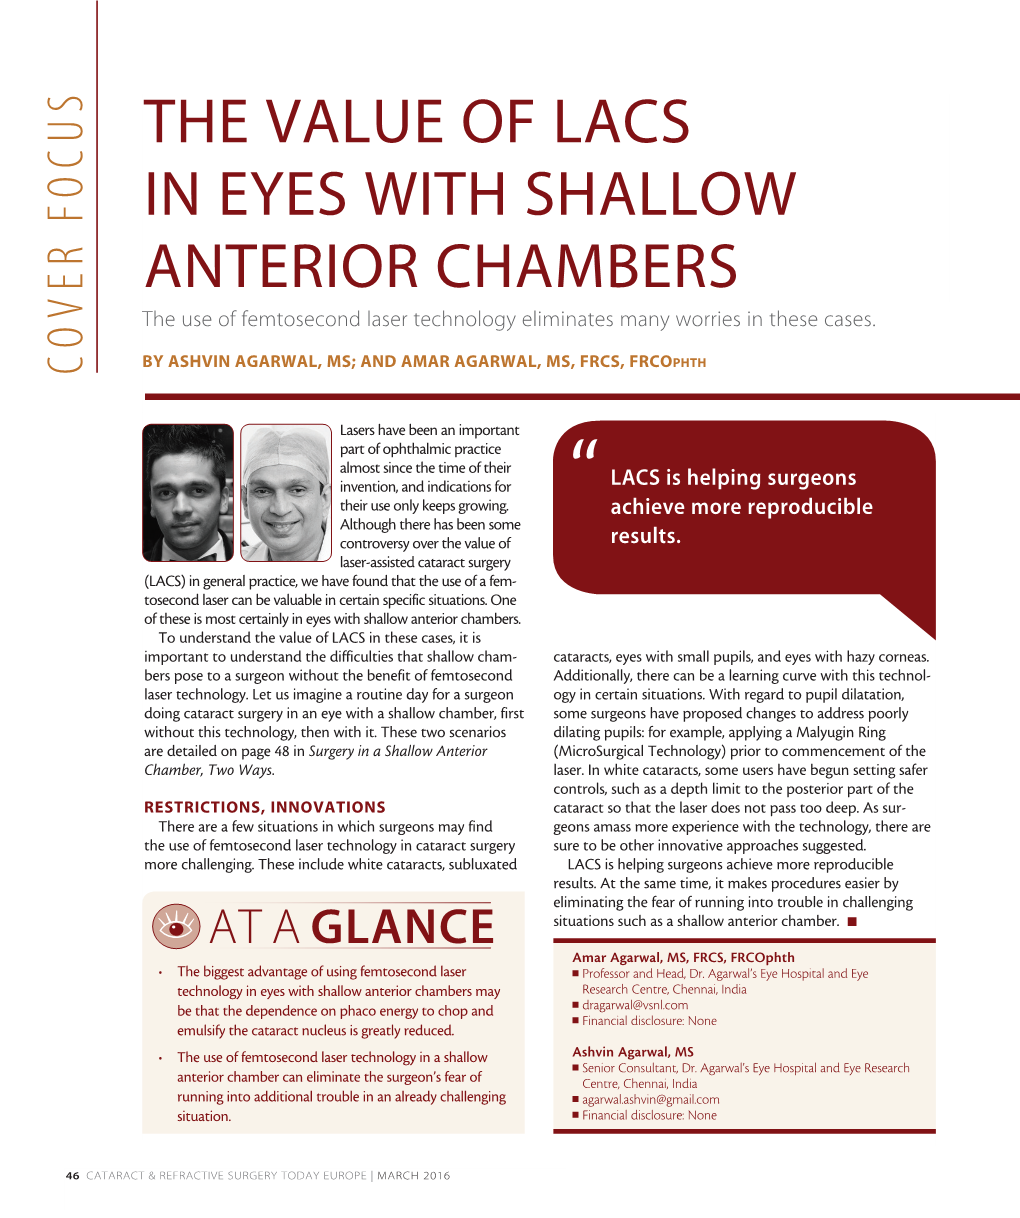 THE VALUE of LACS in EYES with SHALLOW ANTERIOR CHAMBERS the Use of Femtosecond Laser Technology Eliminates Many Worries in These Cases